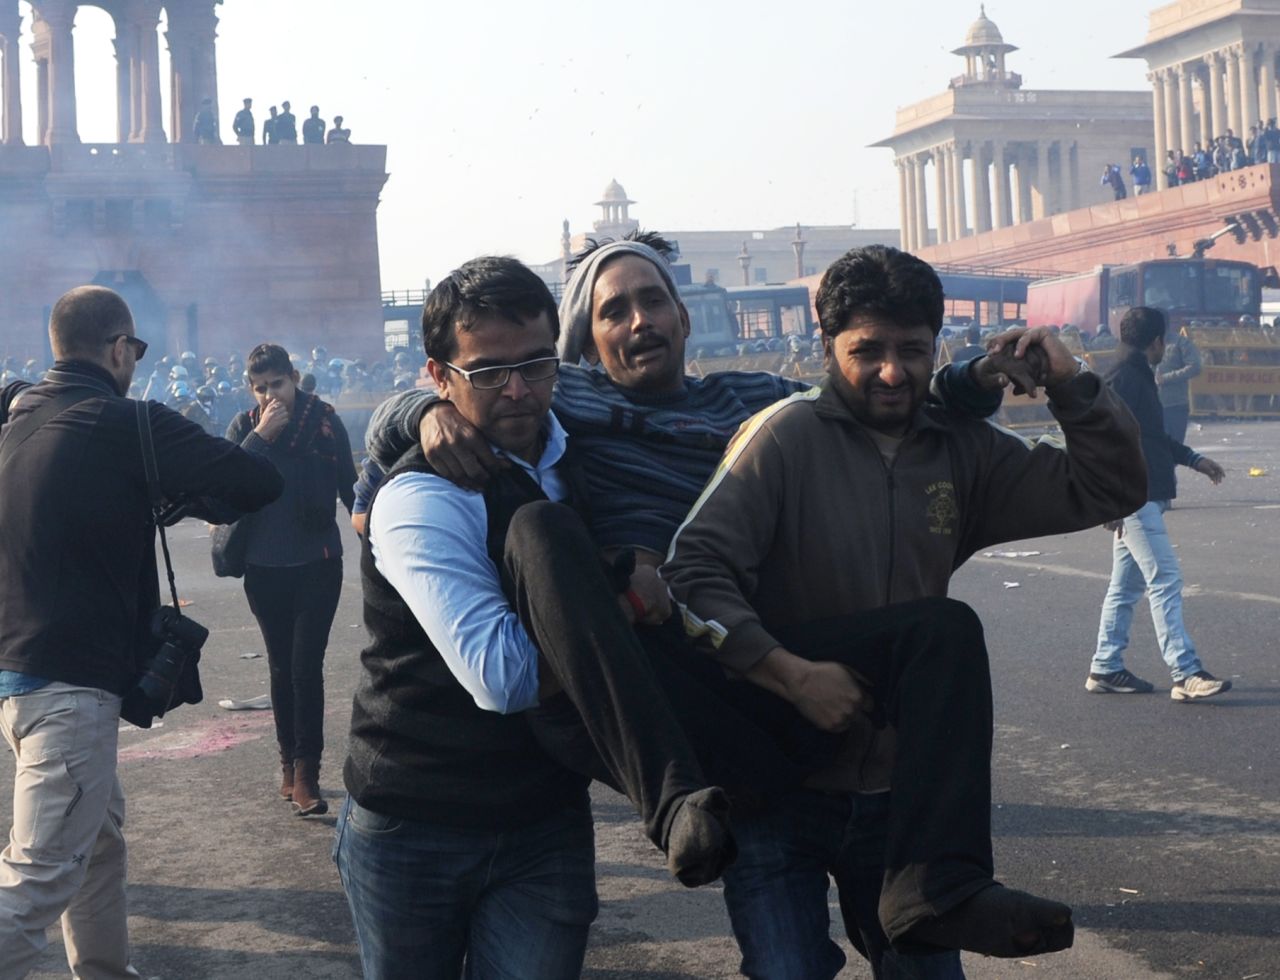 Indian demonstrators carry an injured man from the scene on December 22.